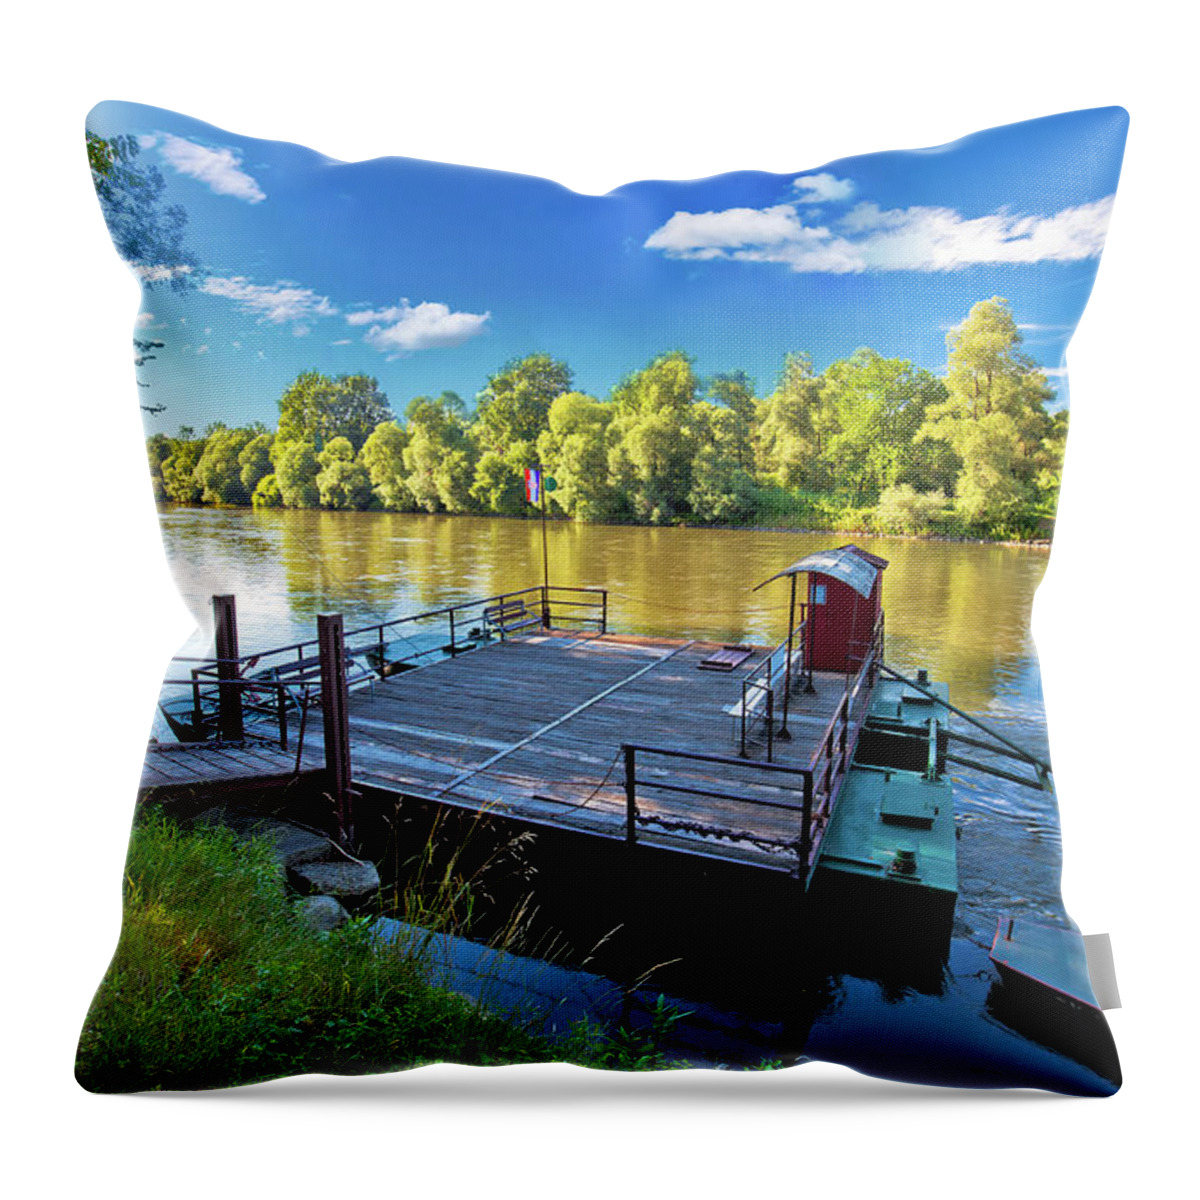 Ferry Throw Pillow featuring the photograph Ferry on Mura river in Medjimurje region view by Brch Photography